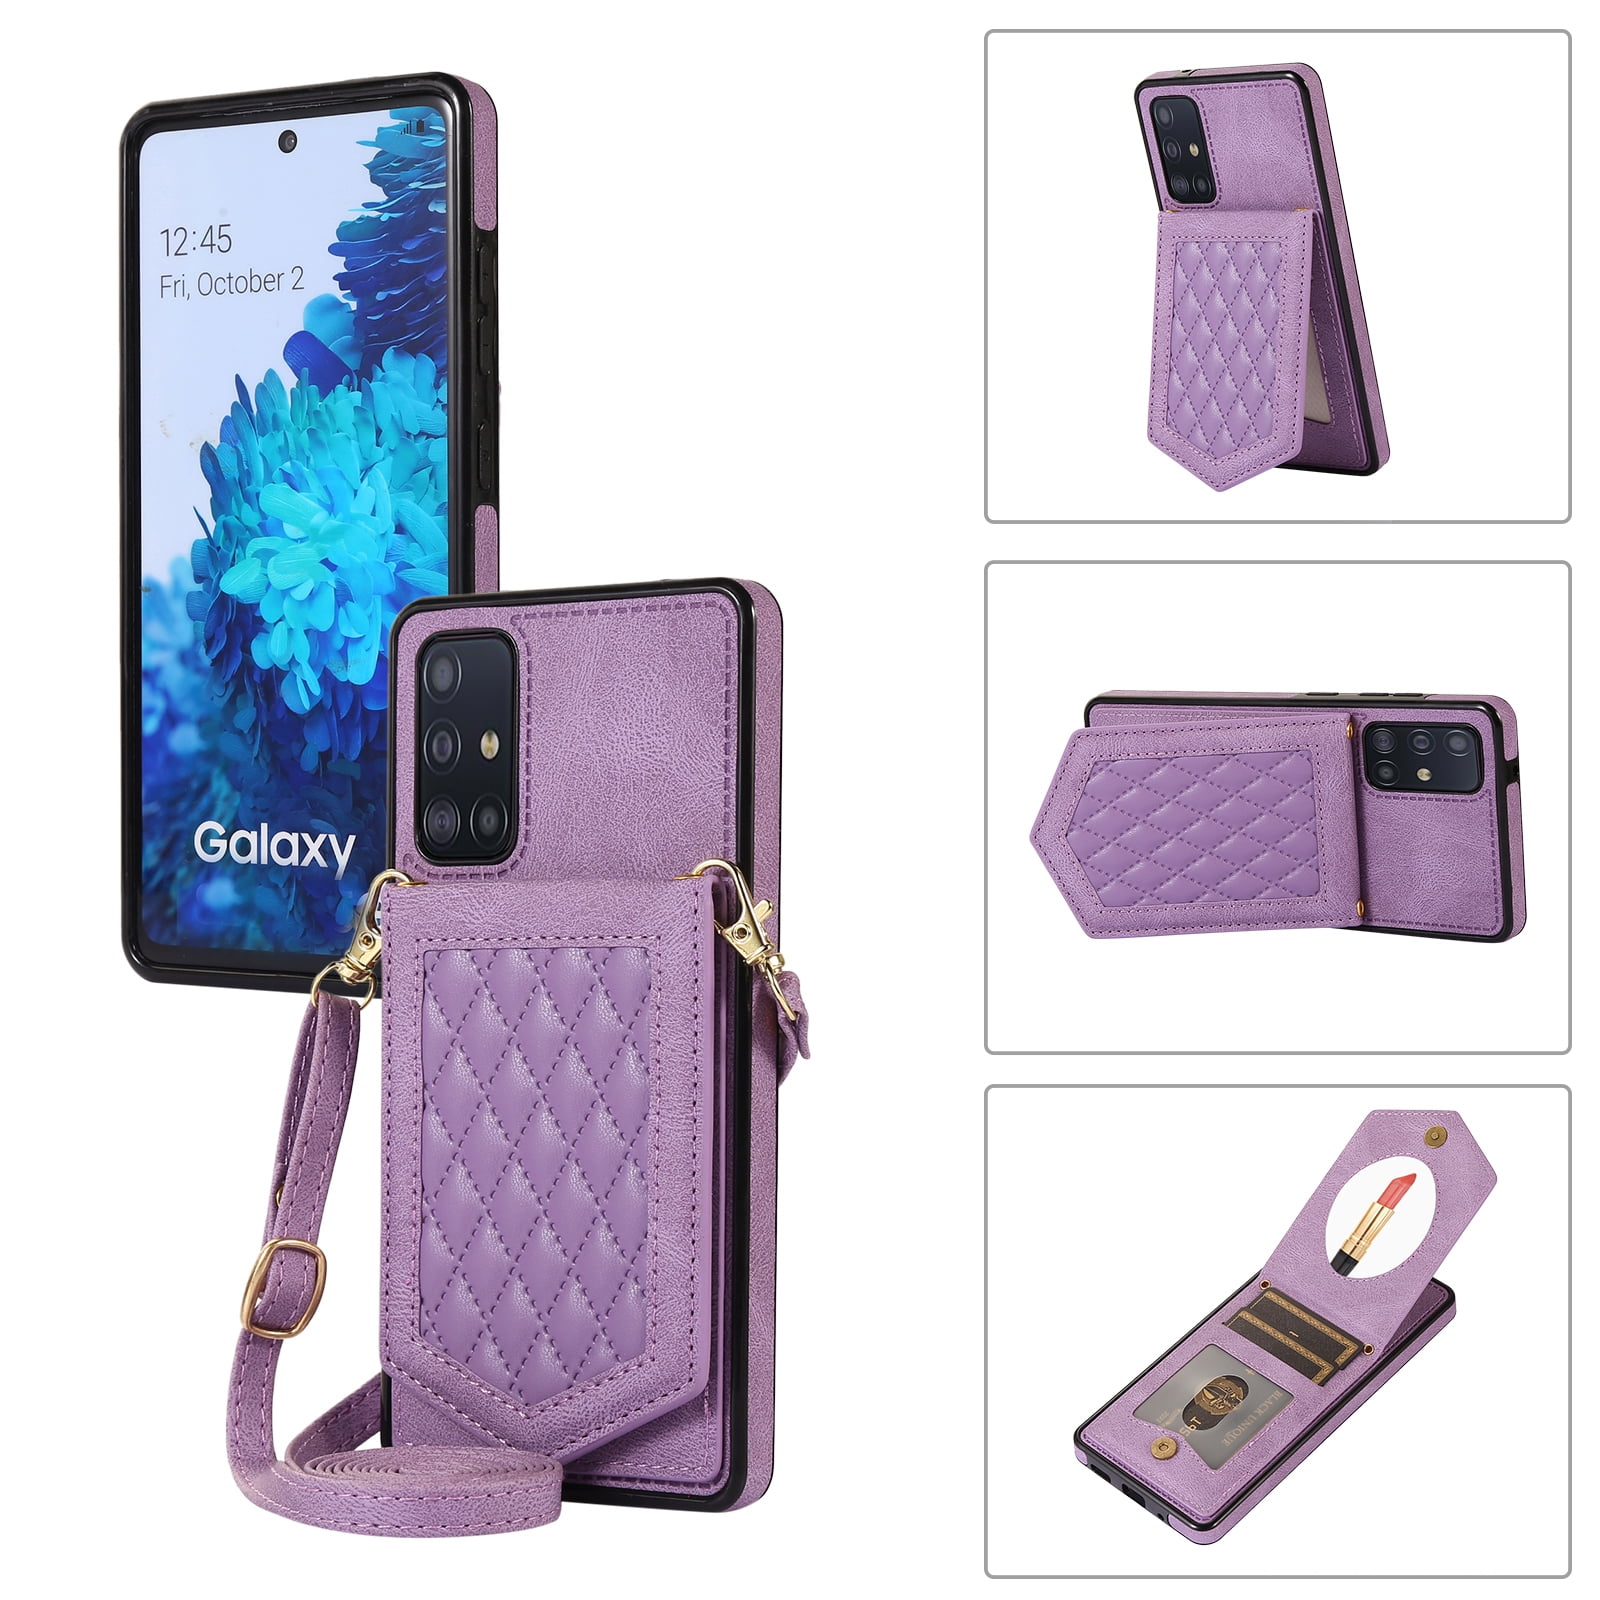 Luxury Leather Case For Samsung Galaxy S20 S26 Ultra Design, Logo Printed Purse  Cover For Women And Men From Phonecase_wholesaler, $7.69 | DHgate.Com